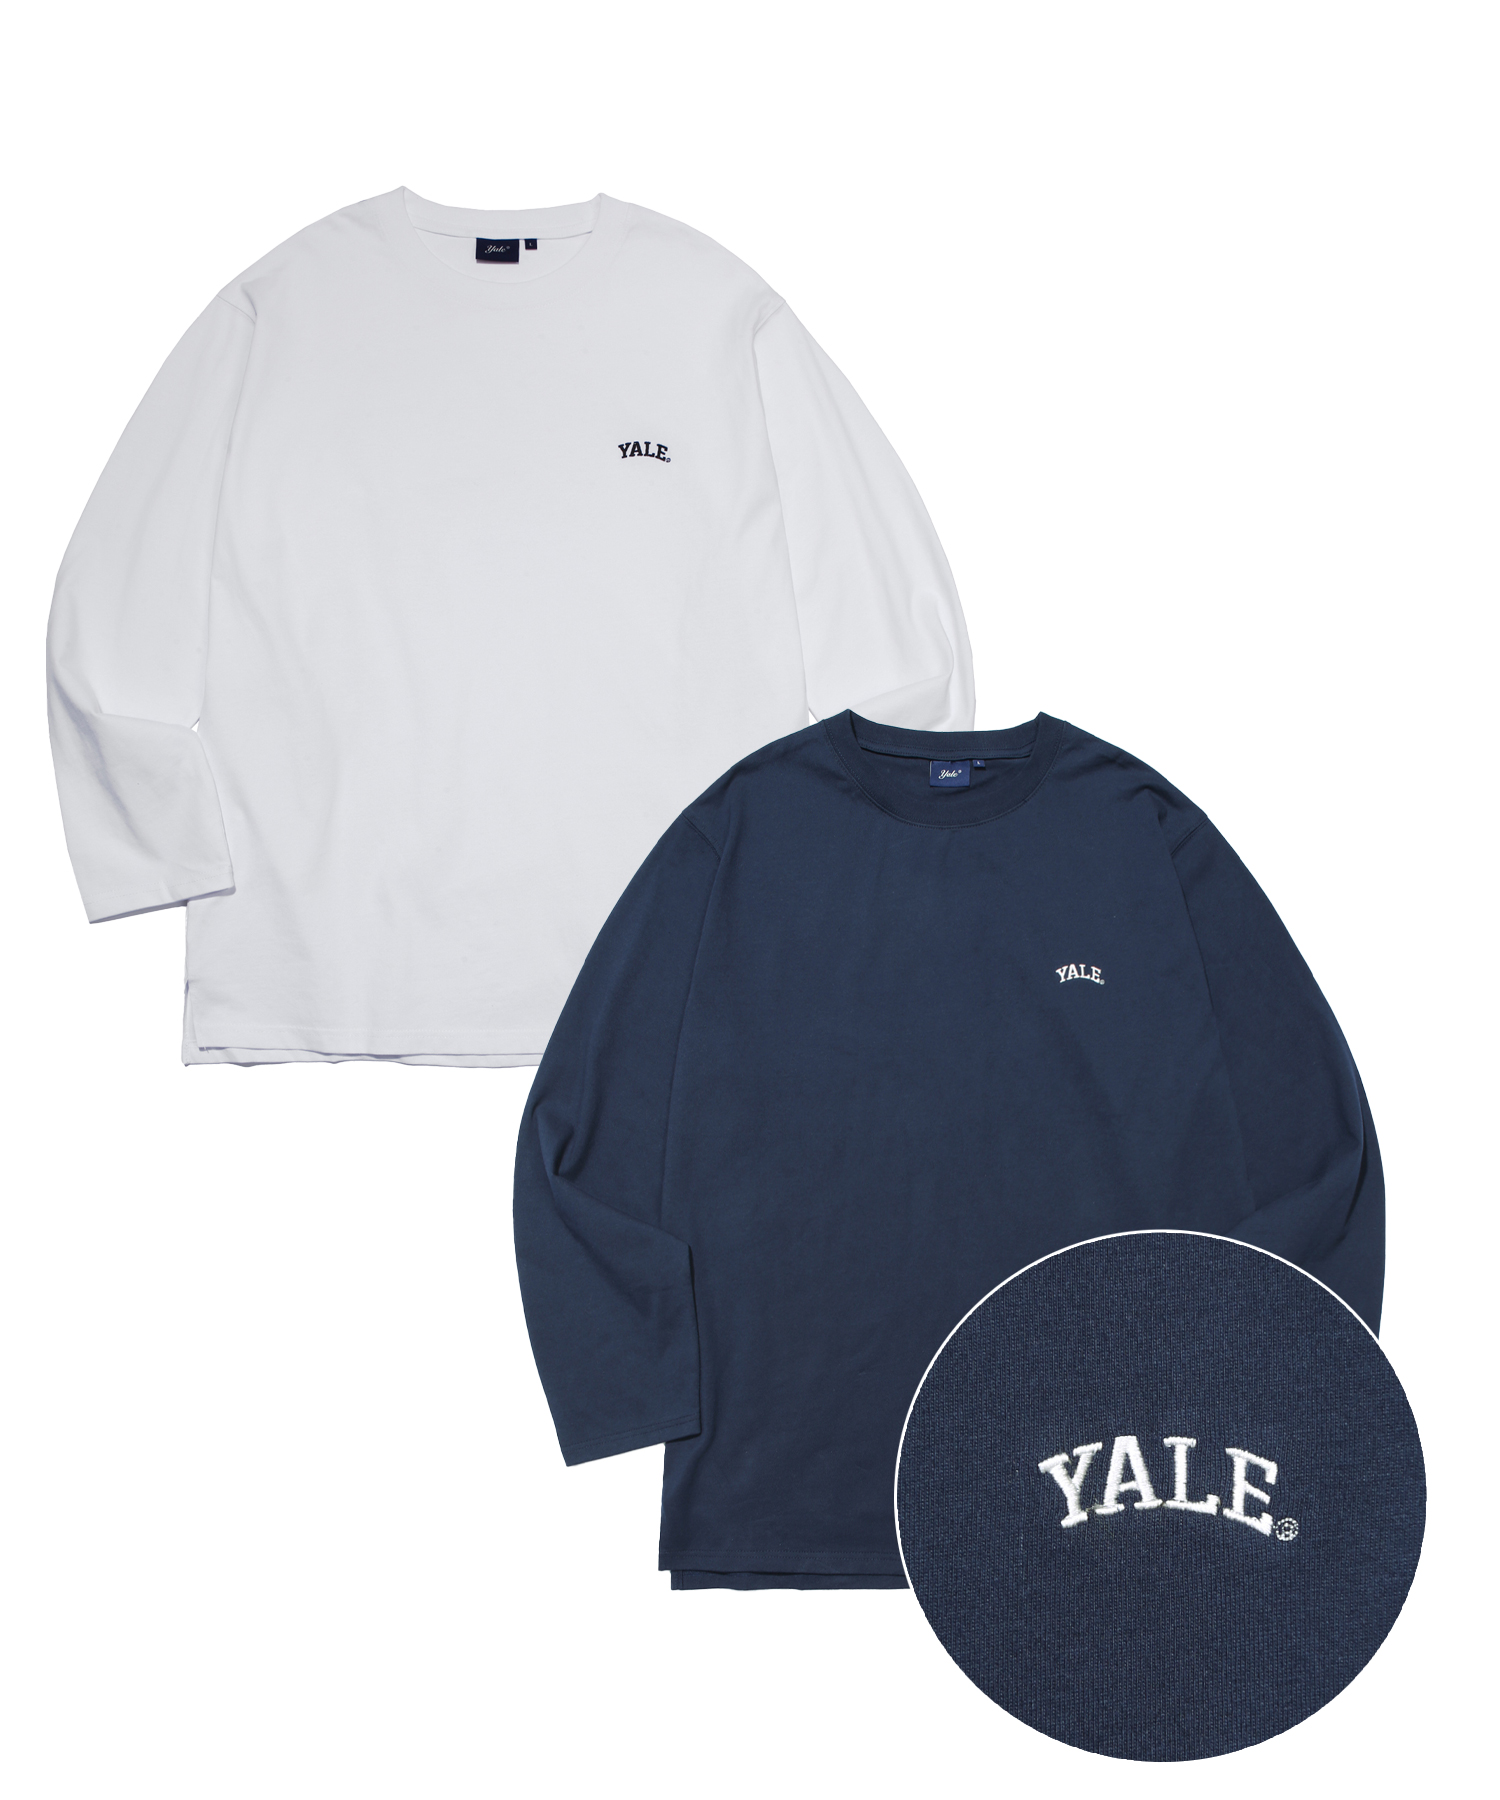 [ONEMILE WEAR] 2PACK SMALL ARCH LAYERED LS WHITE / NAVY